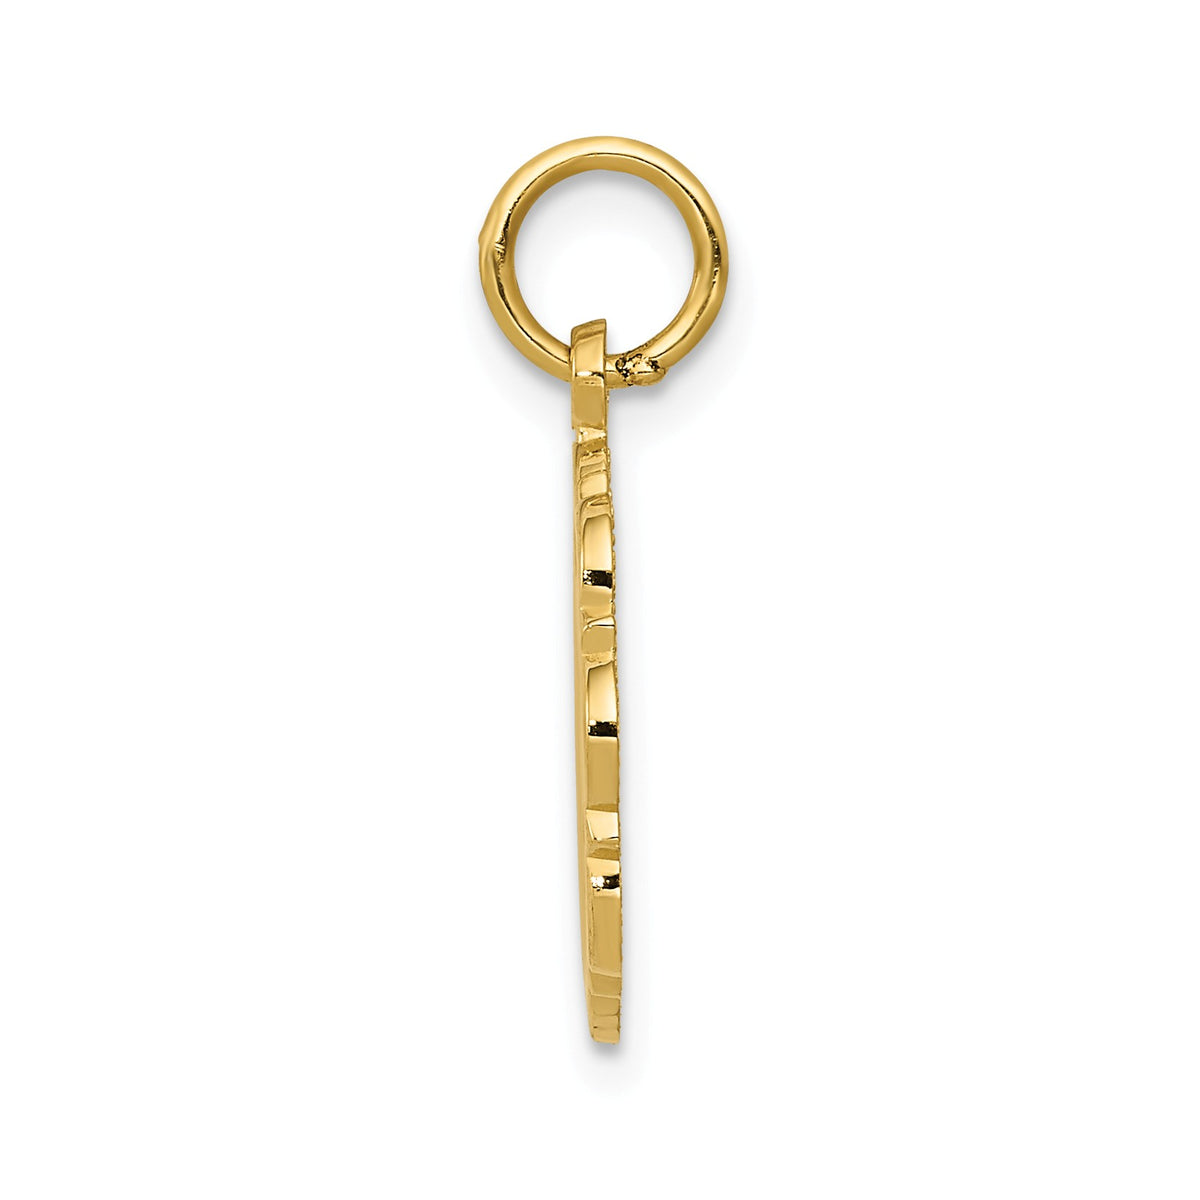 Alternate view of the 14k Yellow Gold Registered Nurse Disk Charm, 14mm by The Black Bow Jewelry Co.